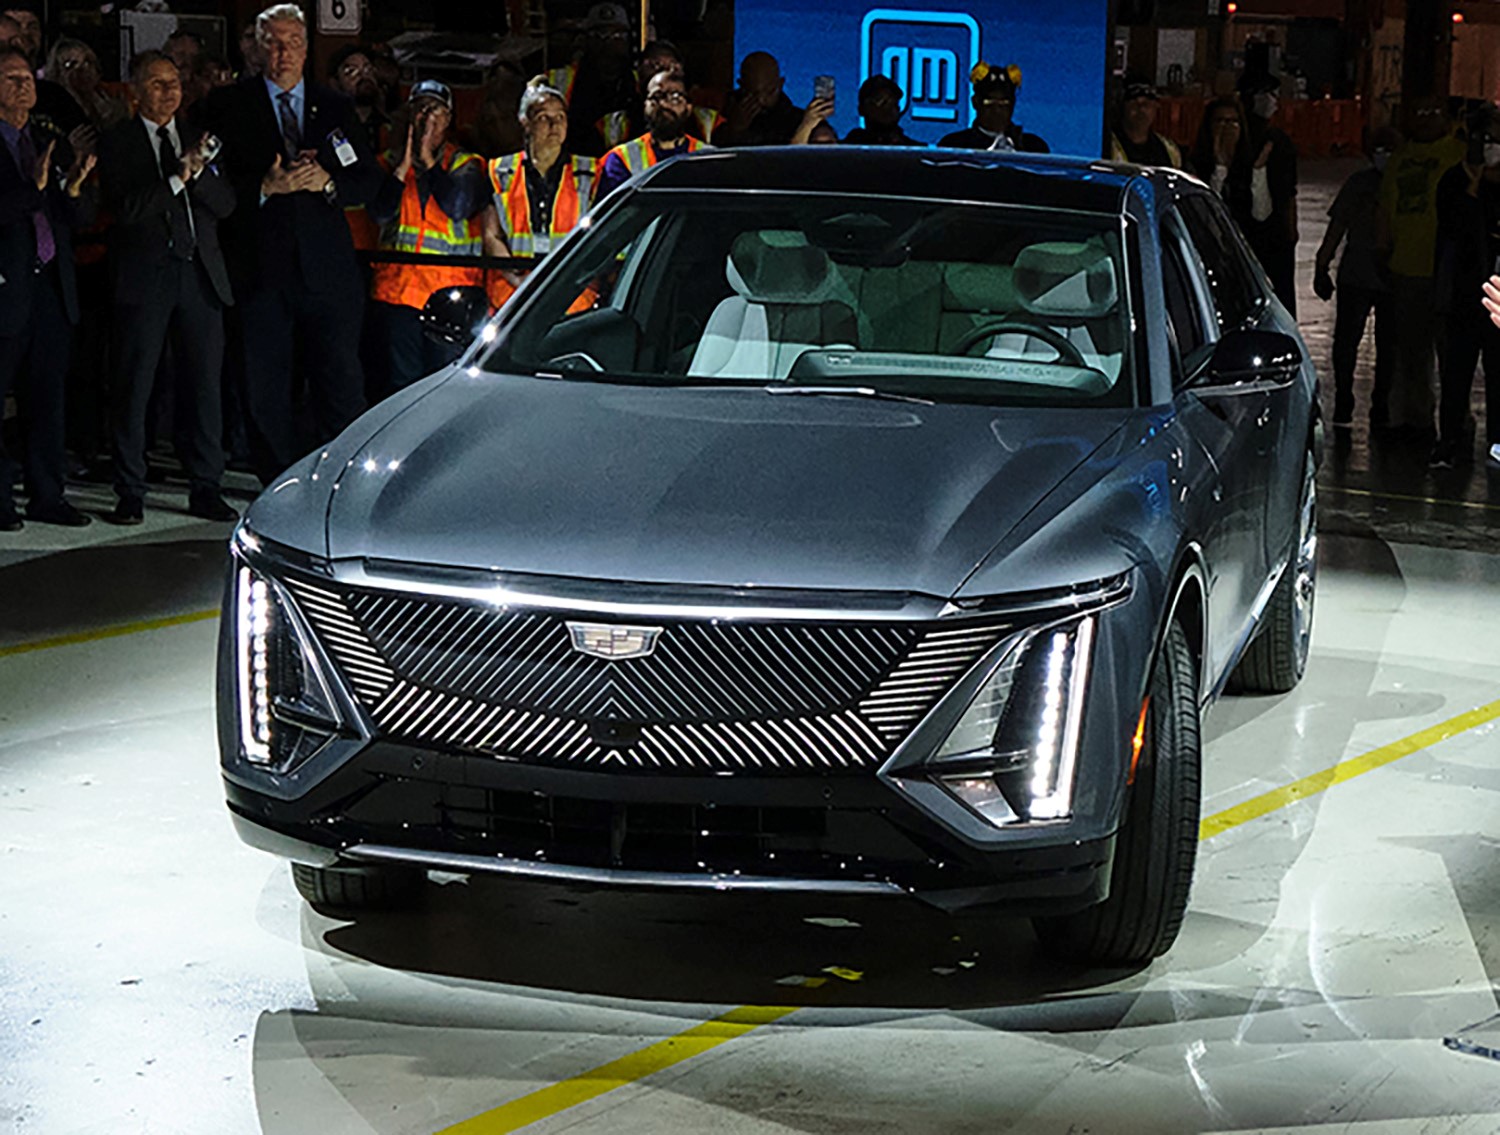 2024 Cadillac CT6 Spotted With Production Lighting